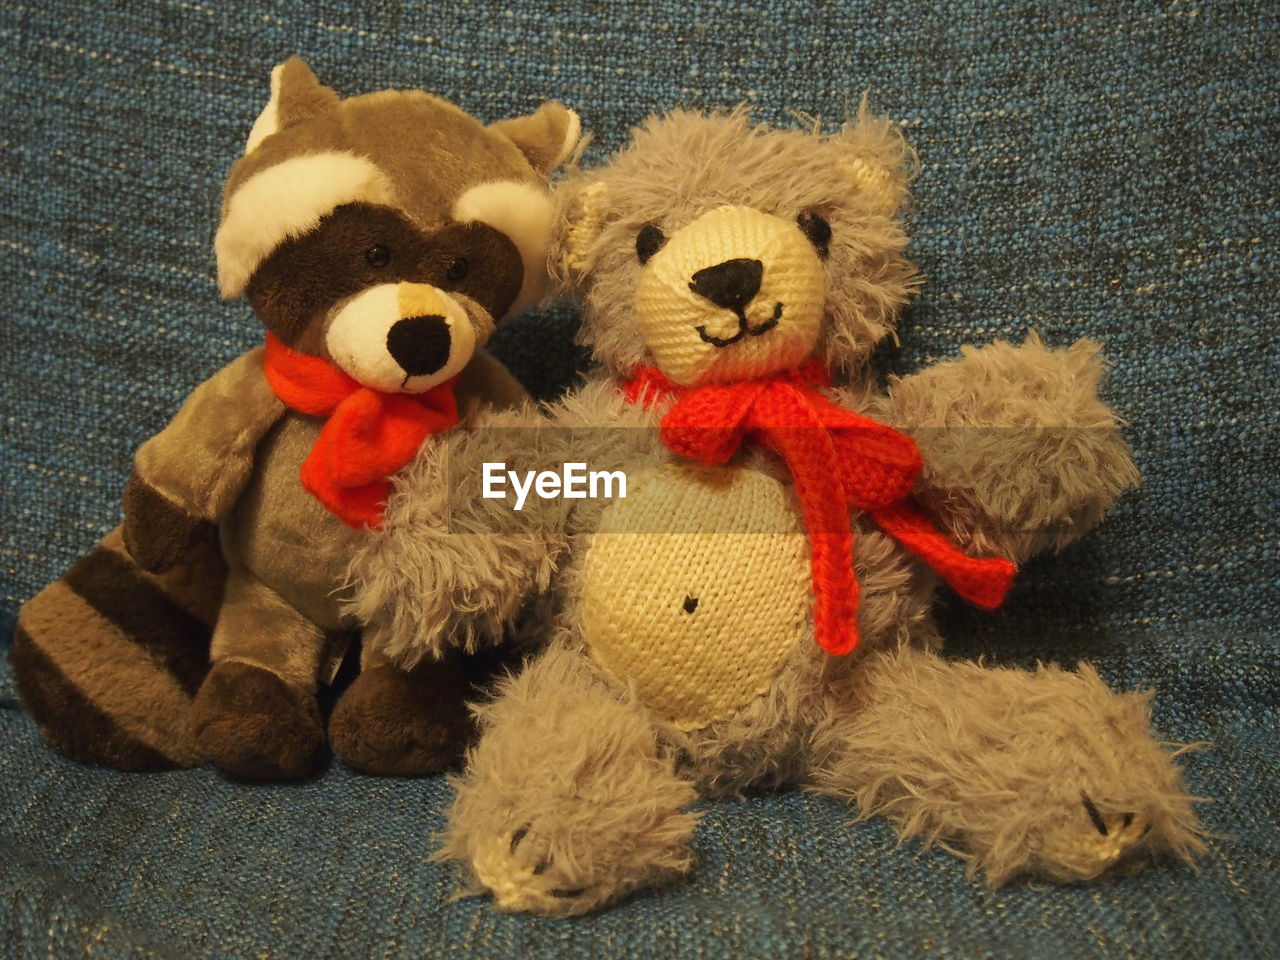 CLOSE-UP OF STUFFED TOY TOYS